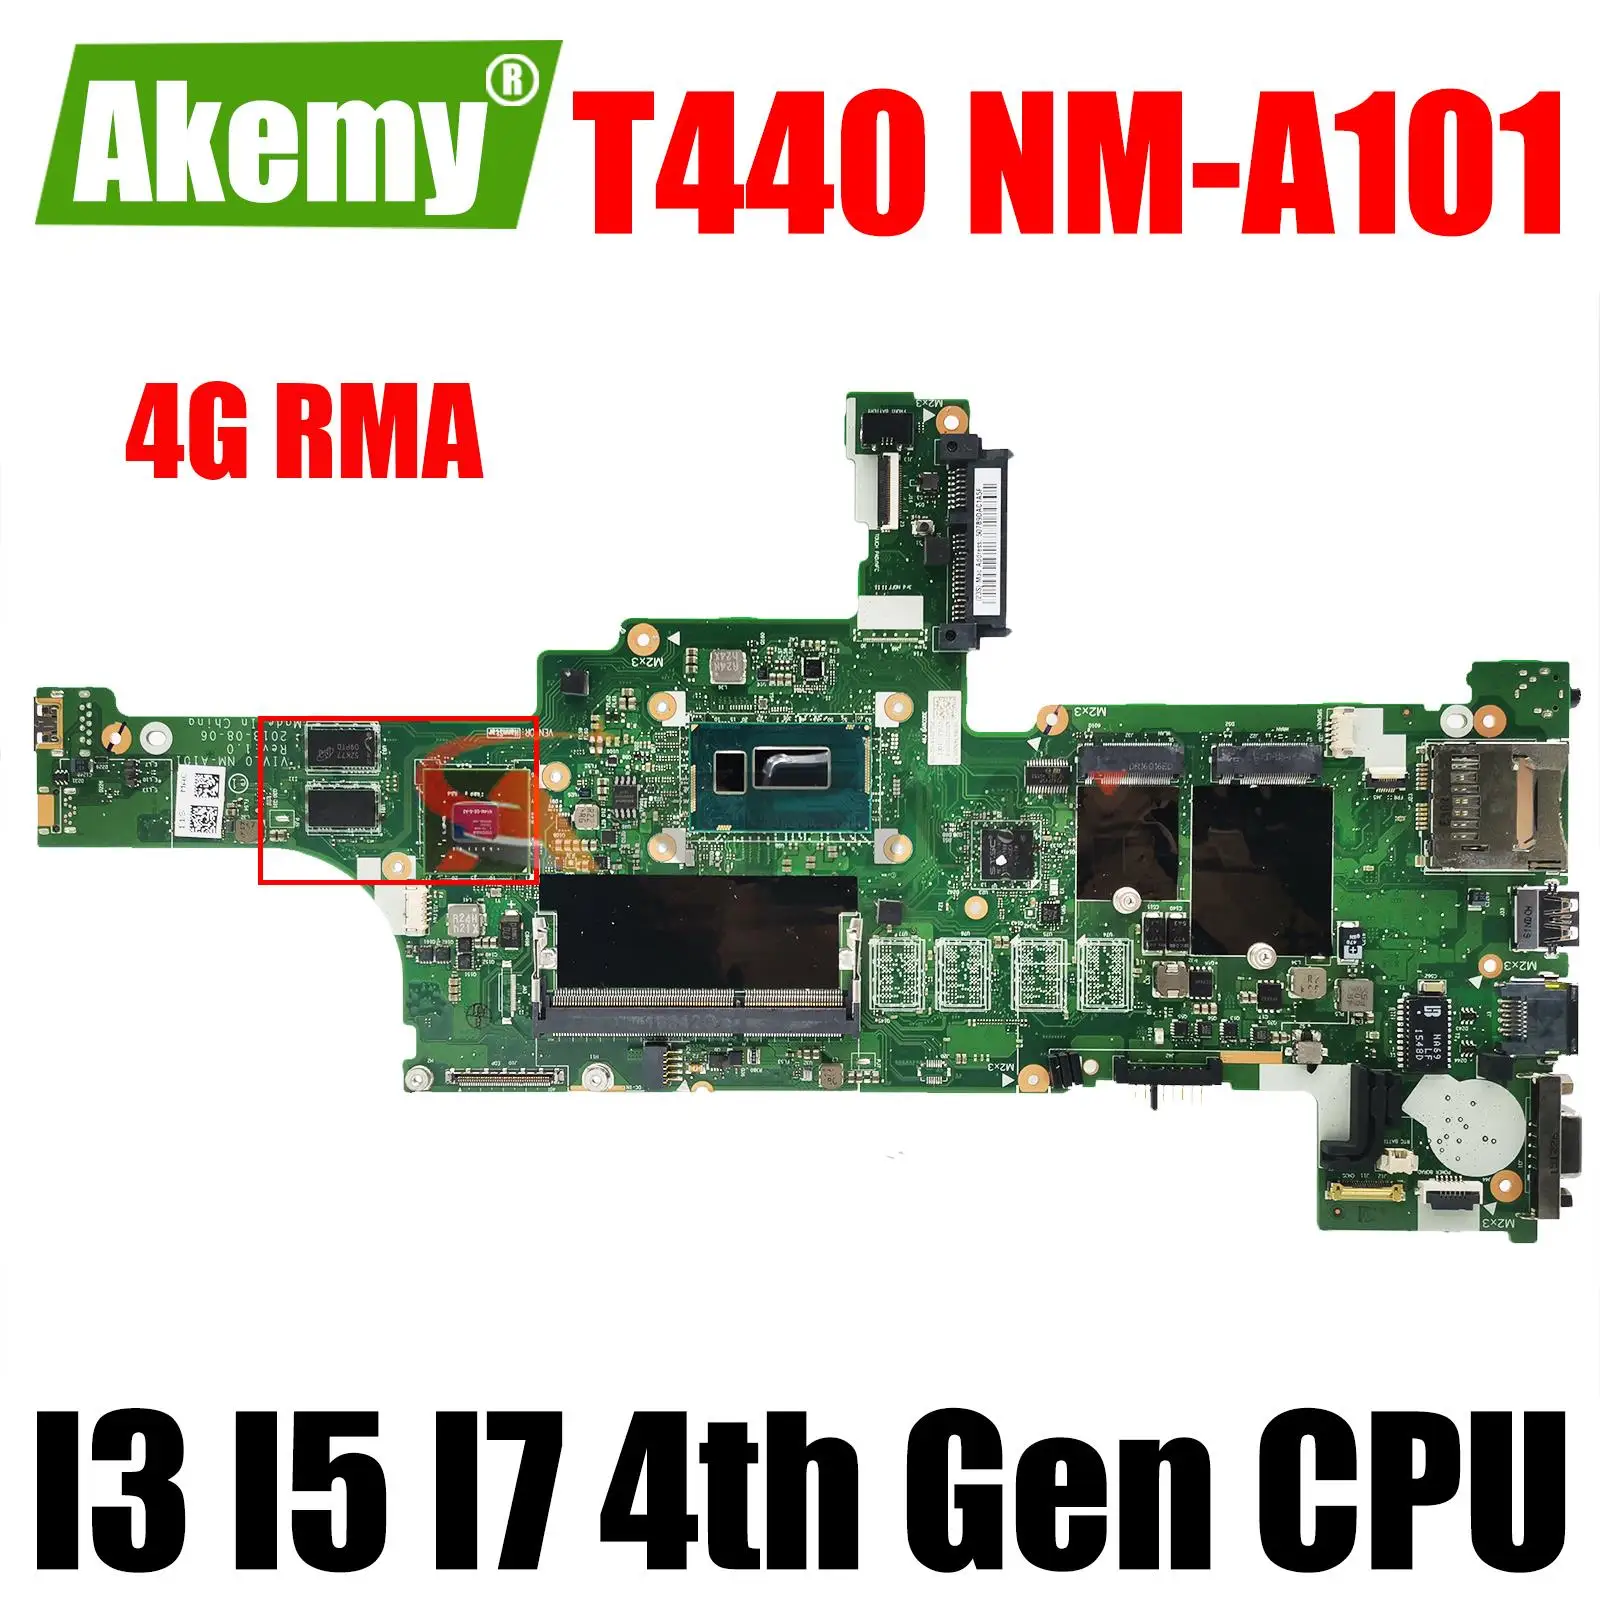 

FOR Lenovo Thinkpad T440 Notebook Motherboard.NM-A101 Motherboard .With I3/i5/I7 4th gen CPU.4G RAM.GT720M GPU.100% Test Work